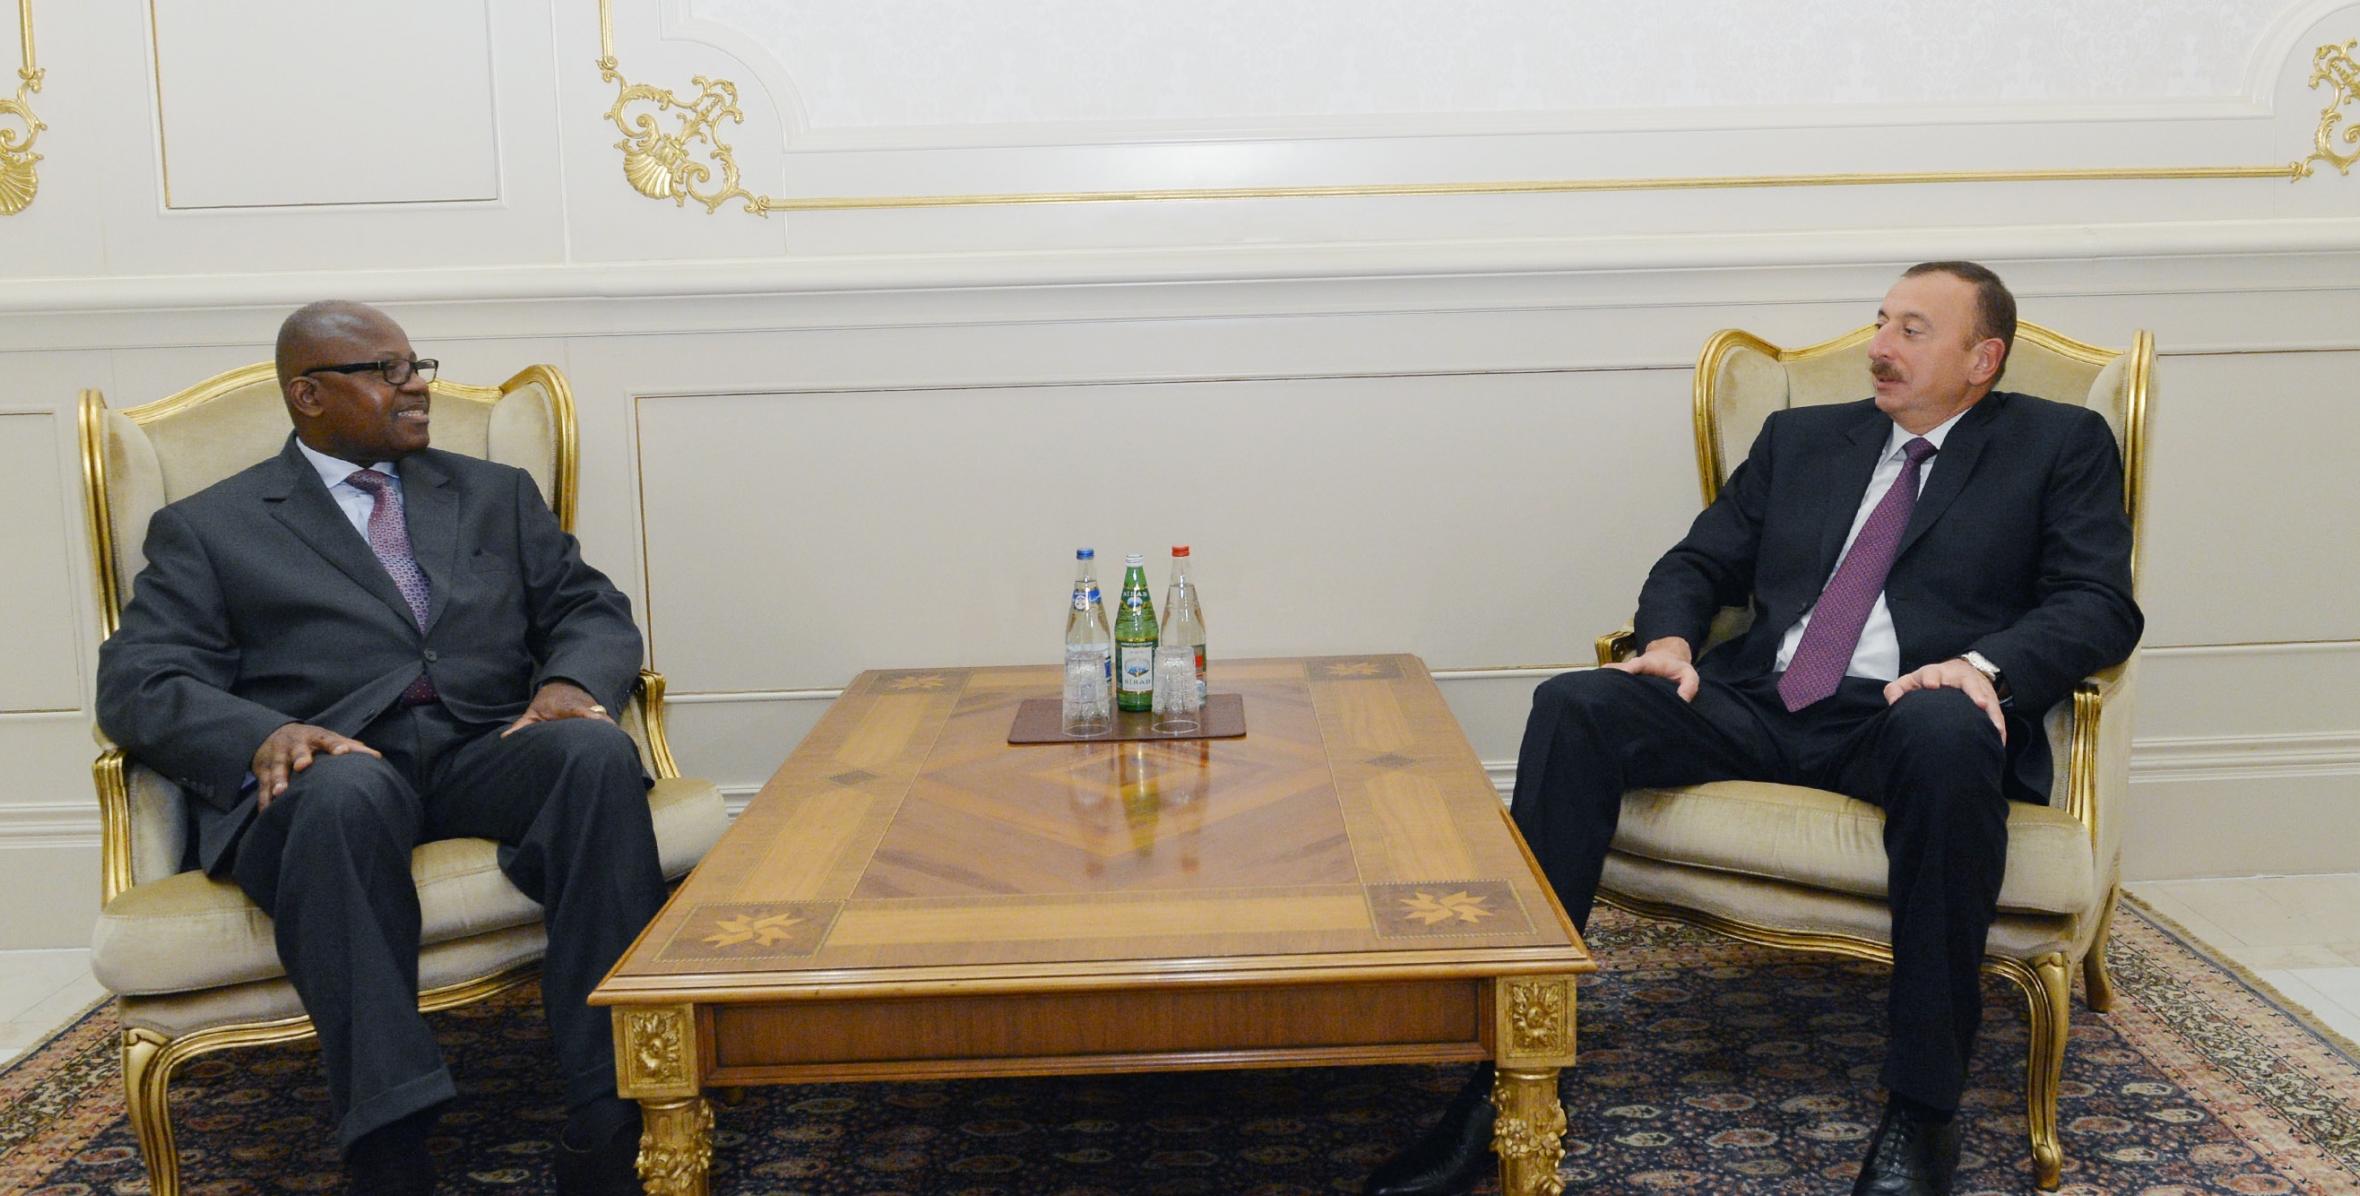 Ilham Aliyev has received the credentials of the newly-appointed ambassador of Angola to Azerbaijan